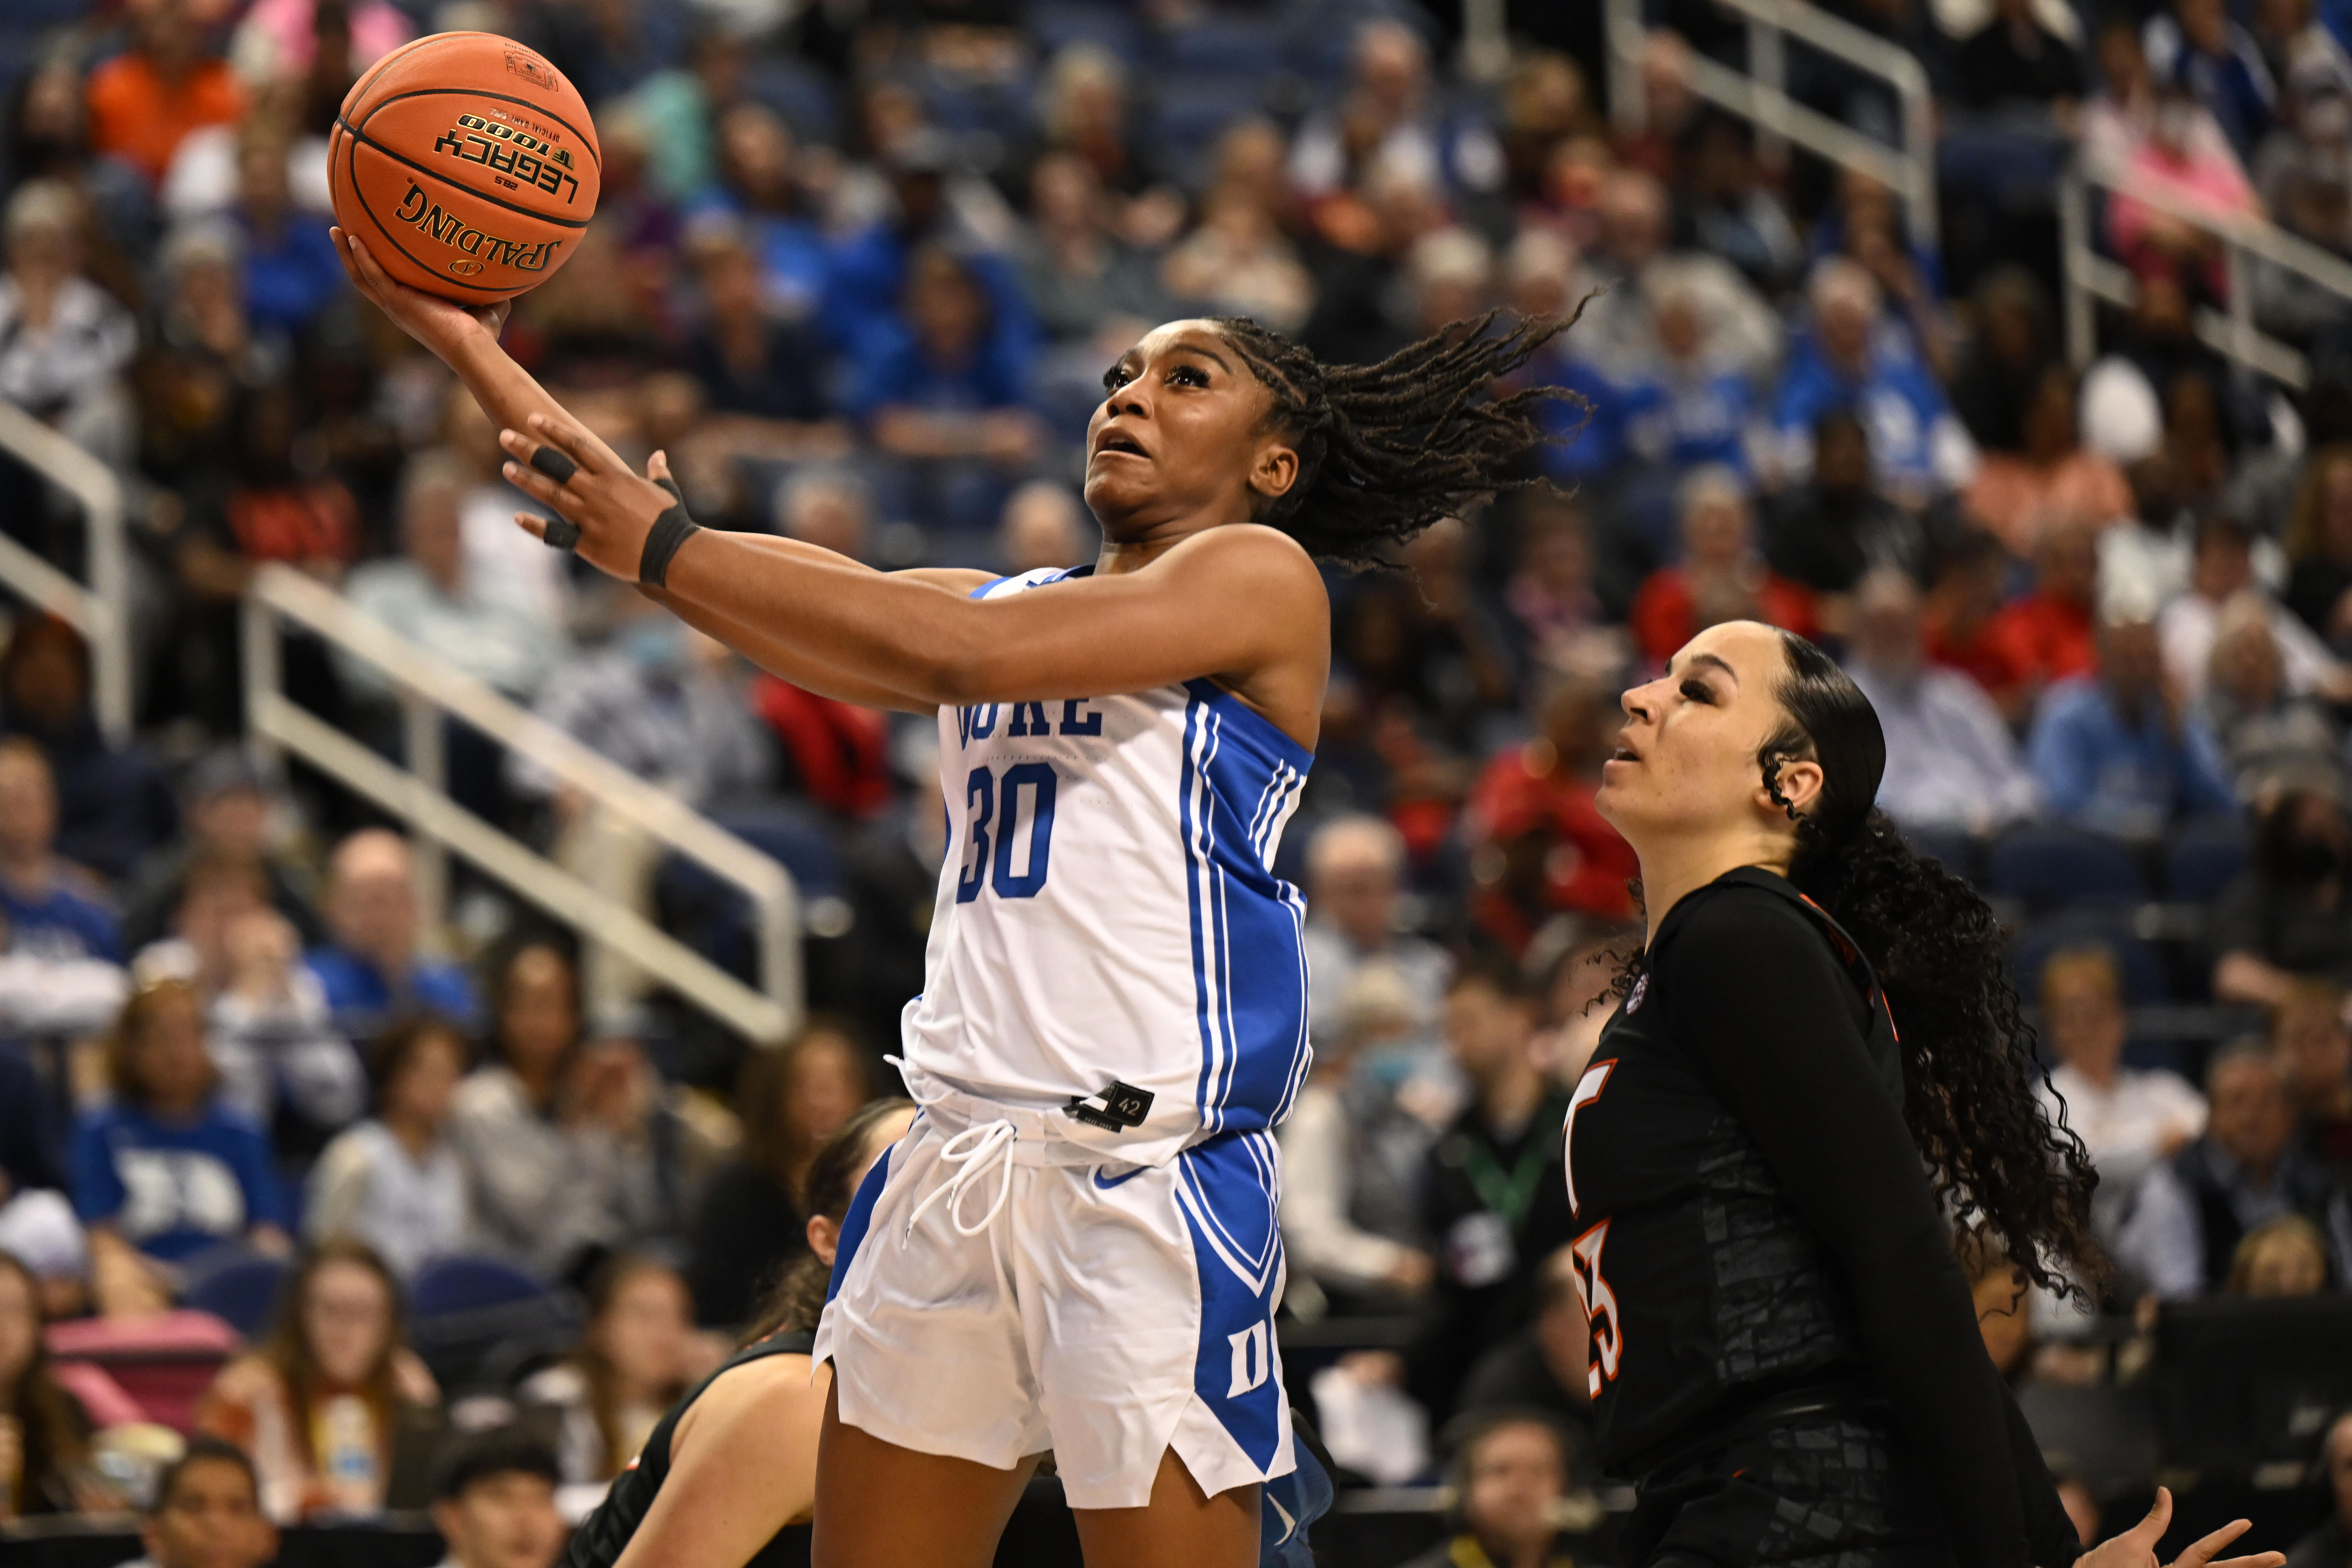 Day-Wilson played for two seasons with Duke before transferring to Miami last season.